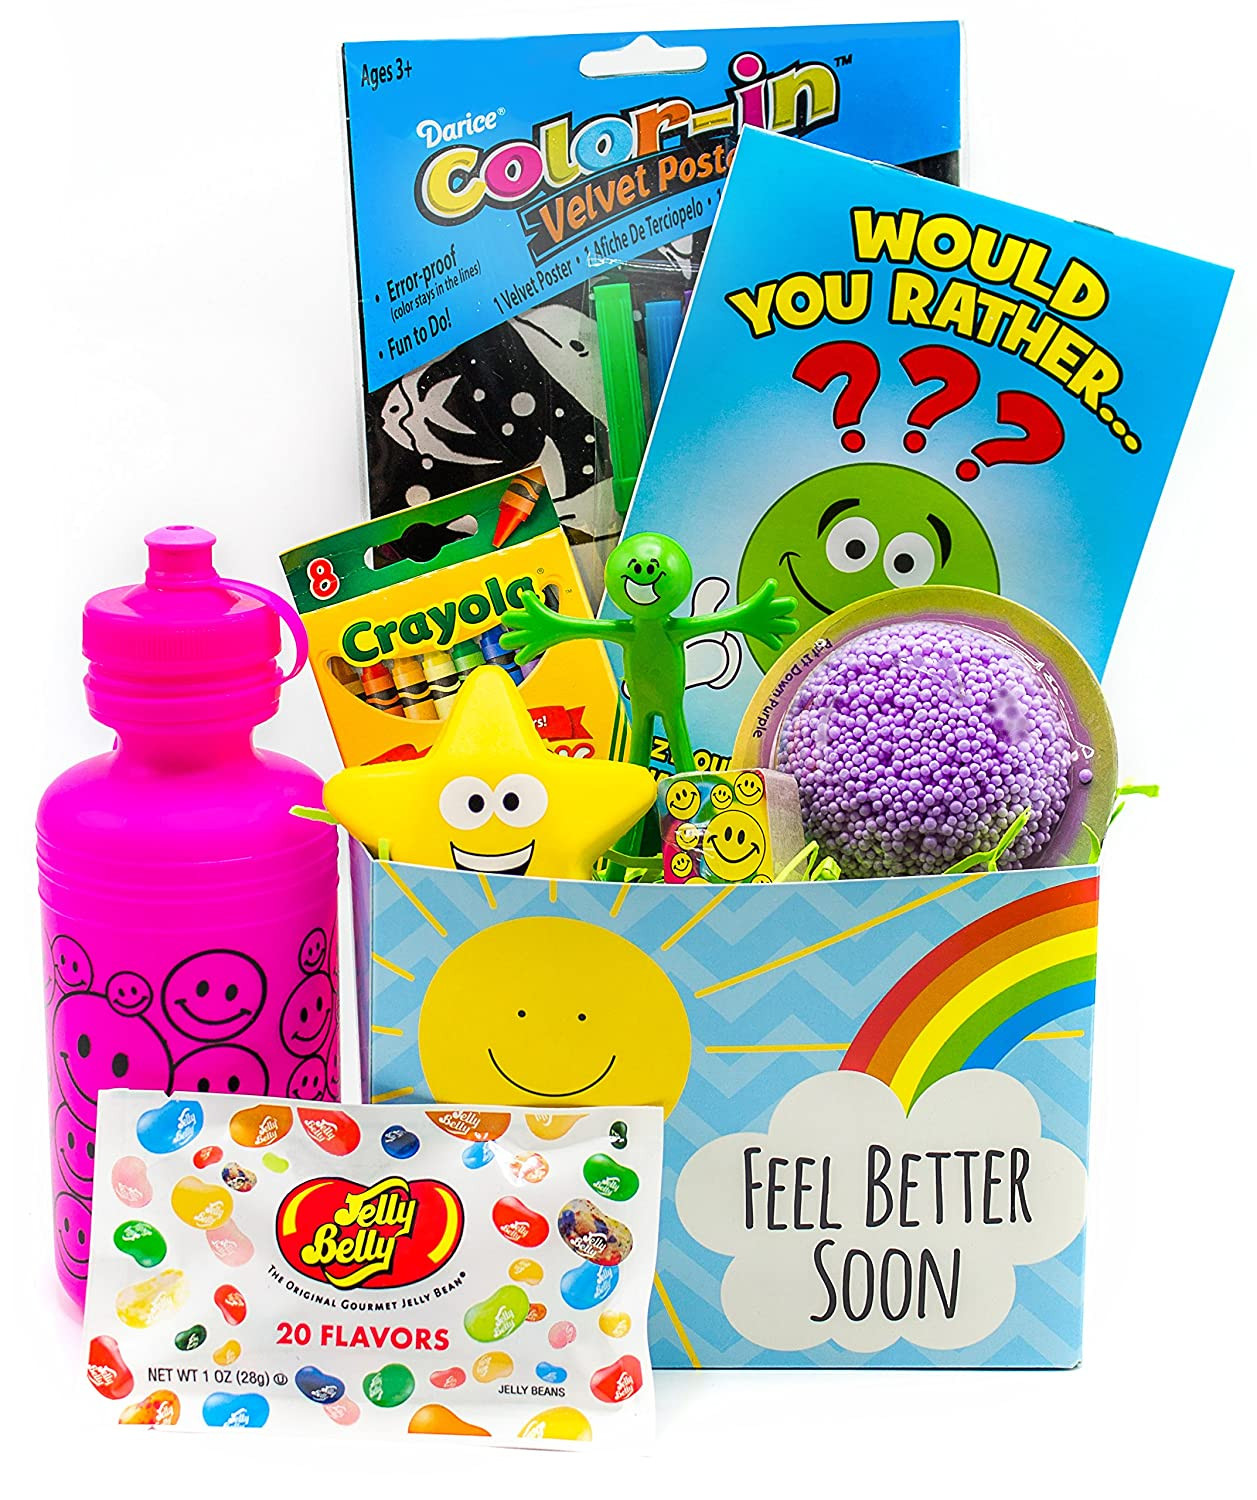 Child Get Well Gift Baskets
 Best Gifts for a Kid with a Broken Arm Bounceback Parenting